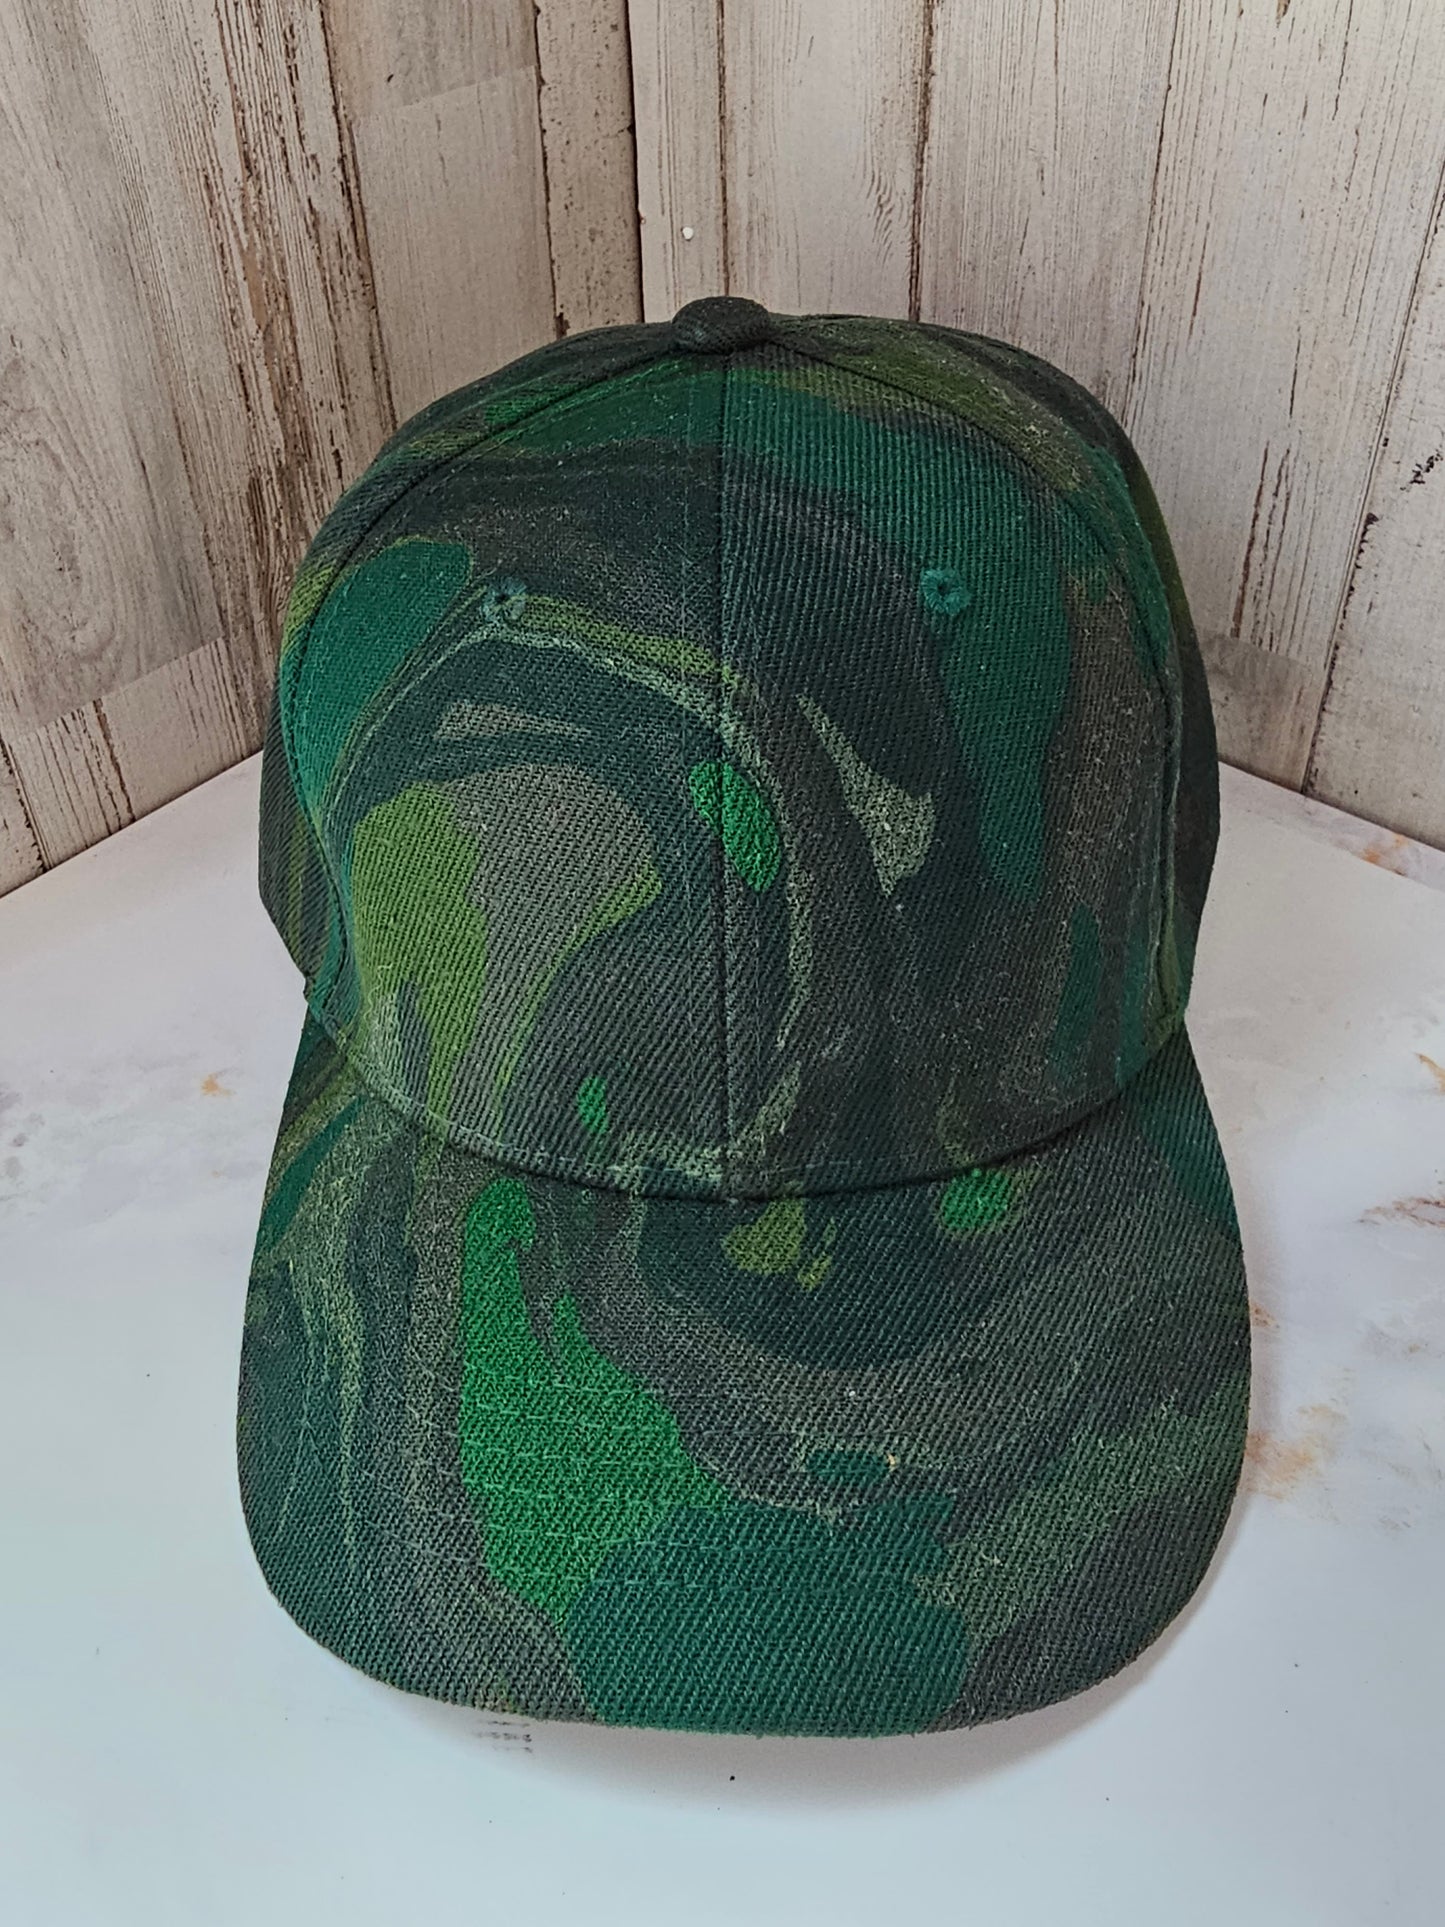 Hydrodipped Hats- Ready To Ship!